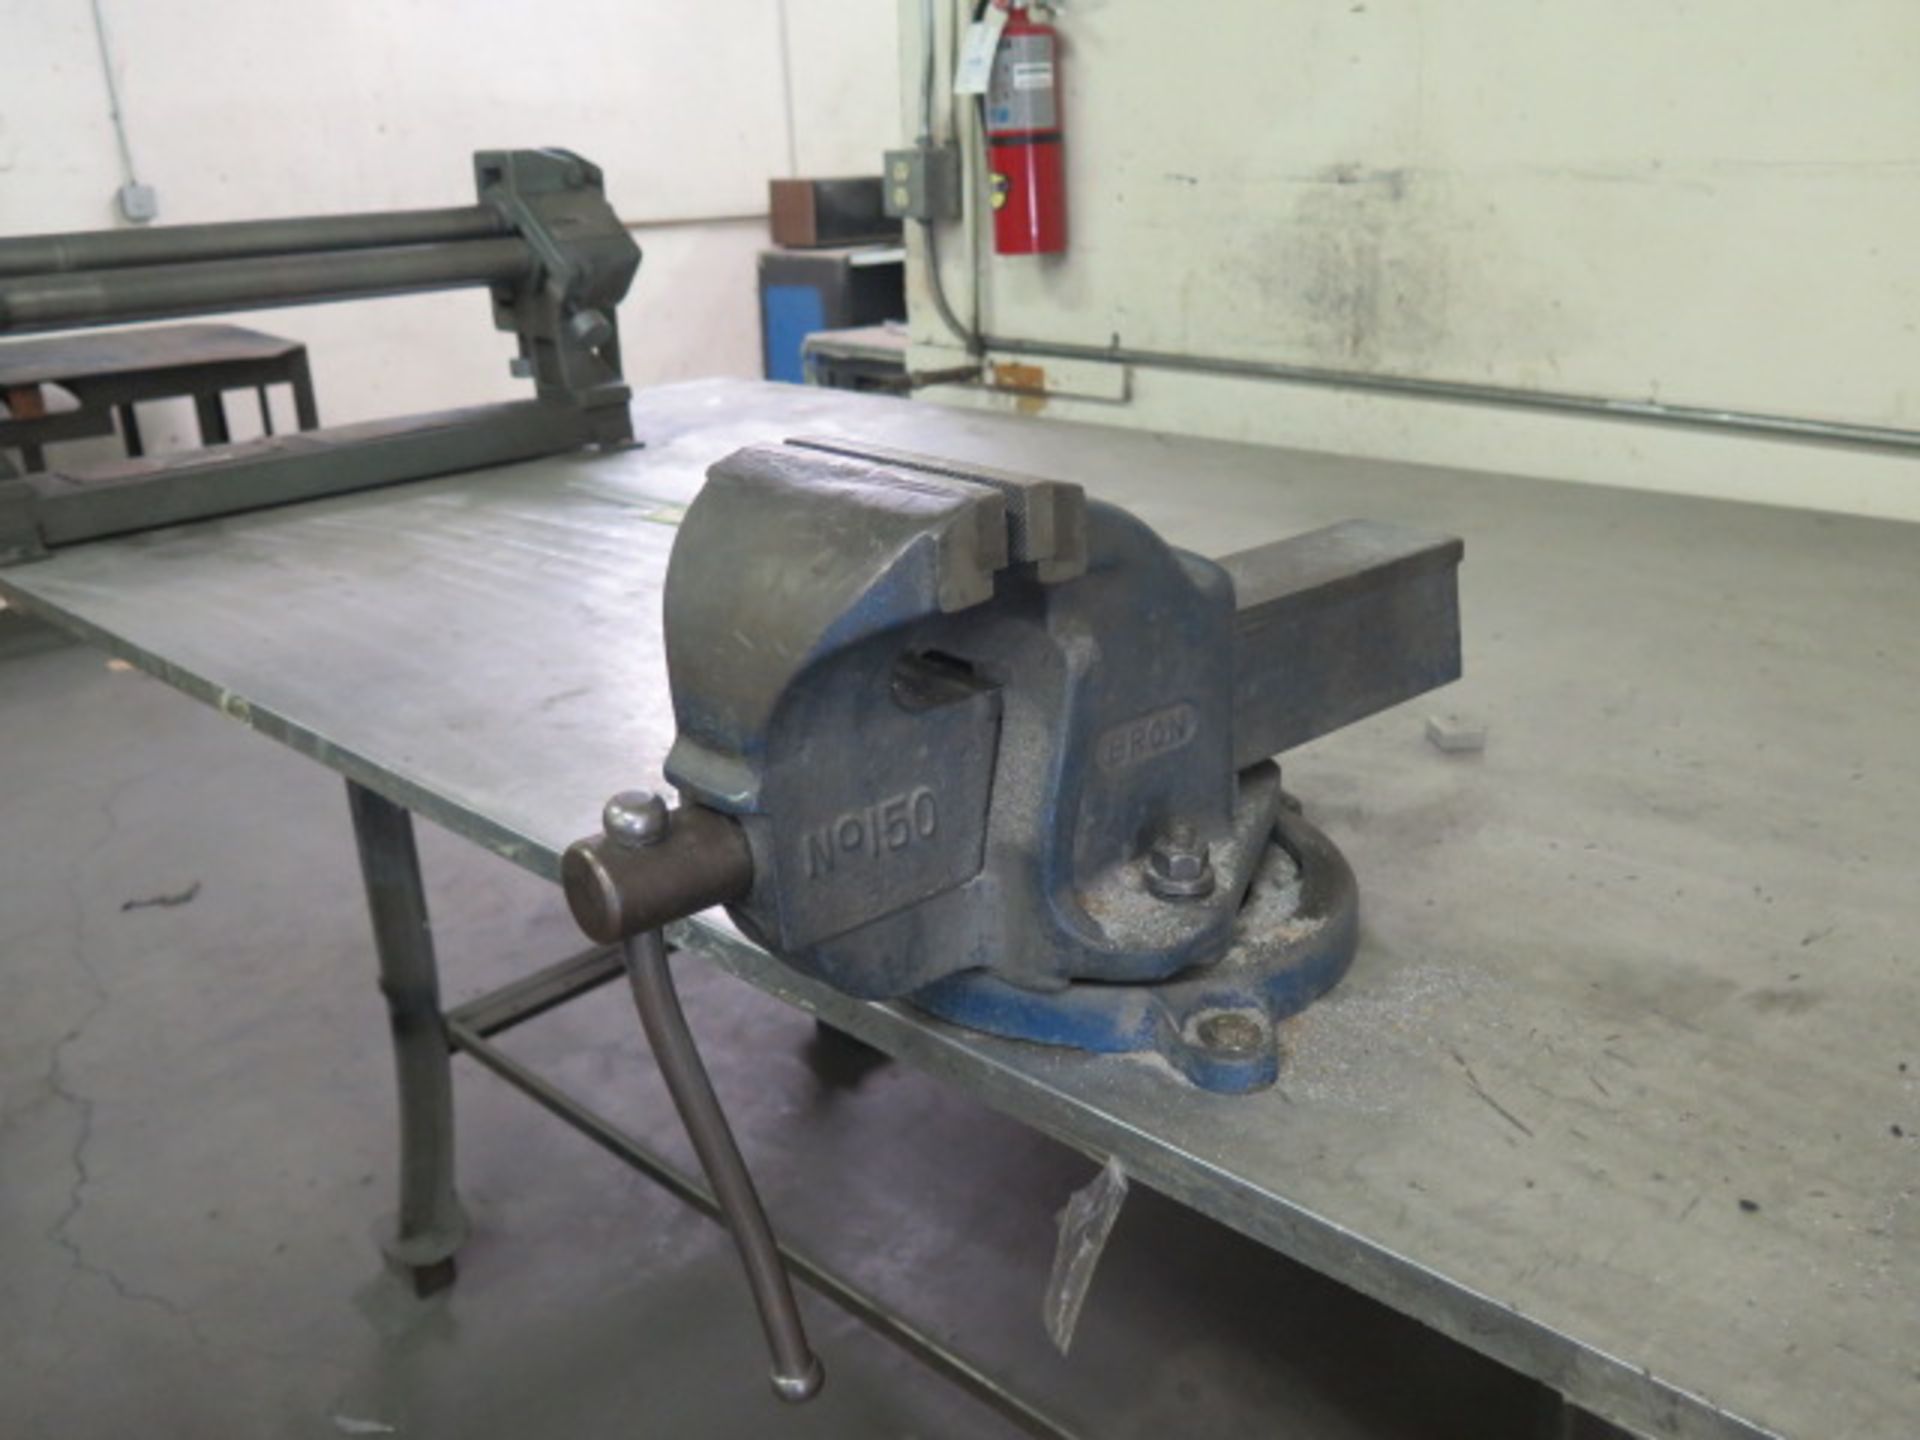 Pexto mdl. 383D 36" Hand Roll w/ 2" Rolls, Eron 6" Bench Vise w/ 48" x 80" x 3/4" Table, SOLD AS IS - Image 7 of 9